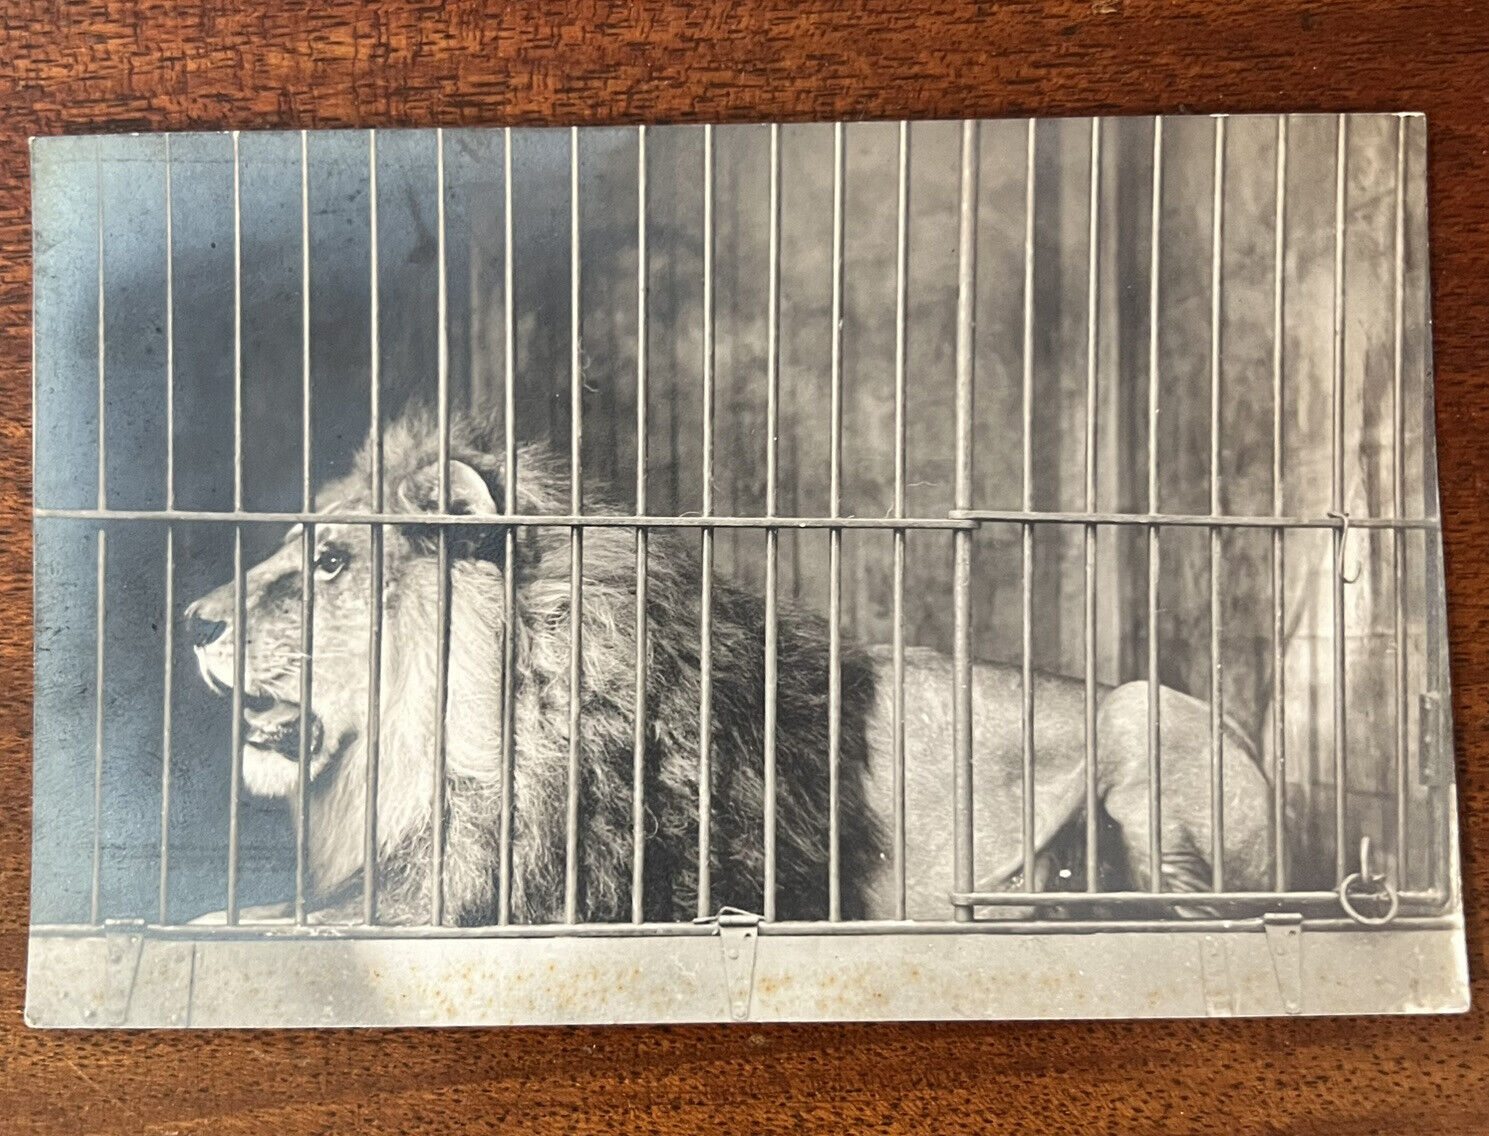 ATQ c1910s-20s RPPC Caged Male Lion CYKO Stamp Block Unposted Zoo